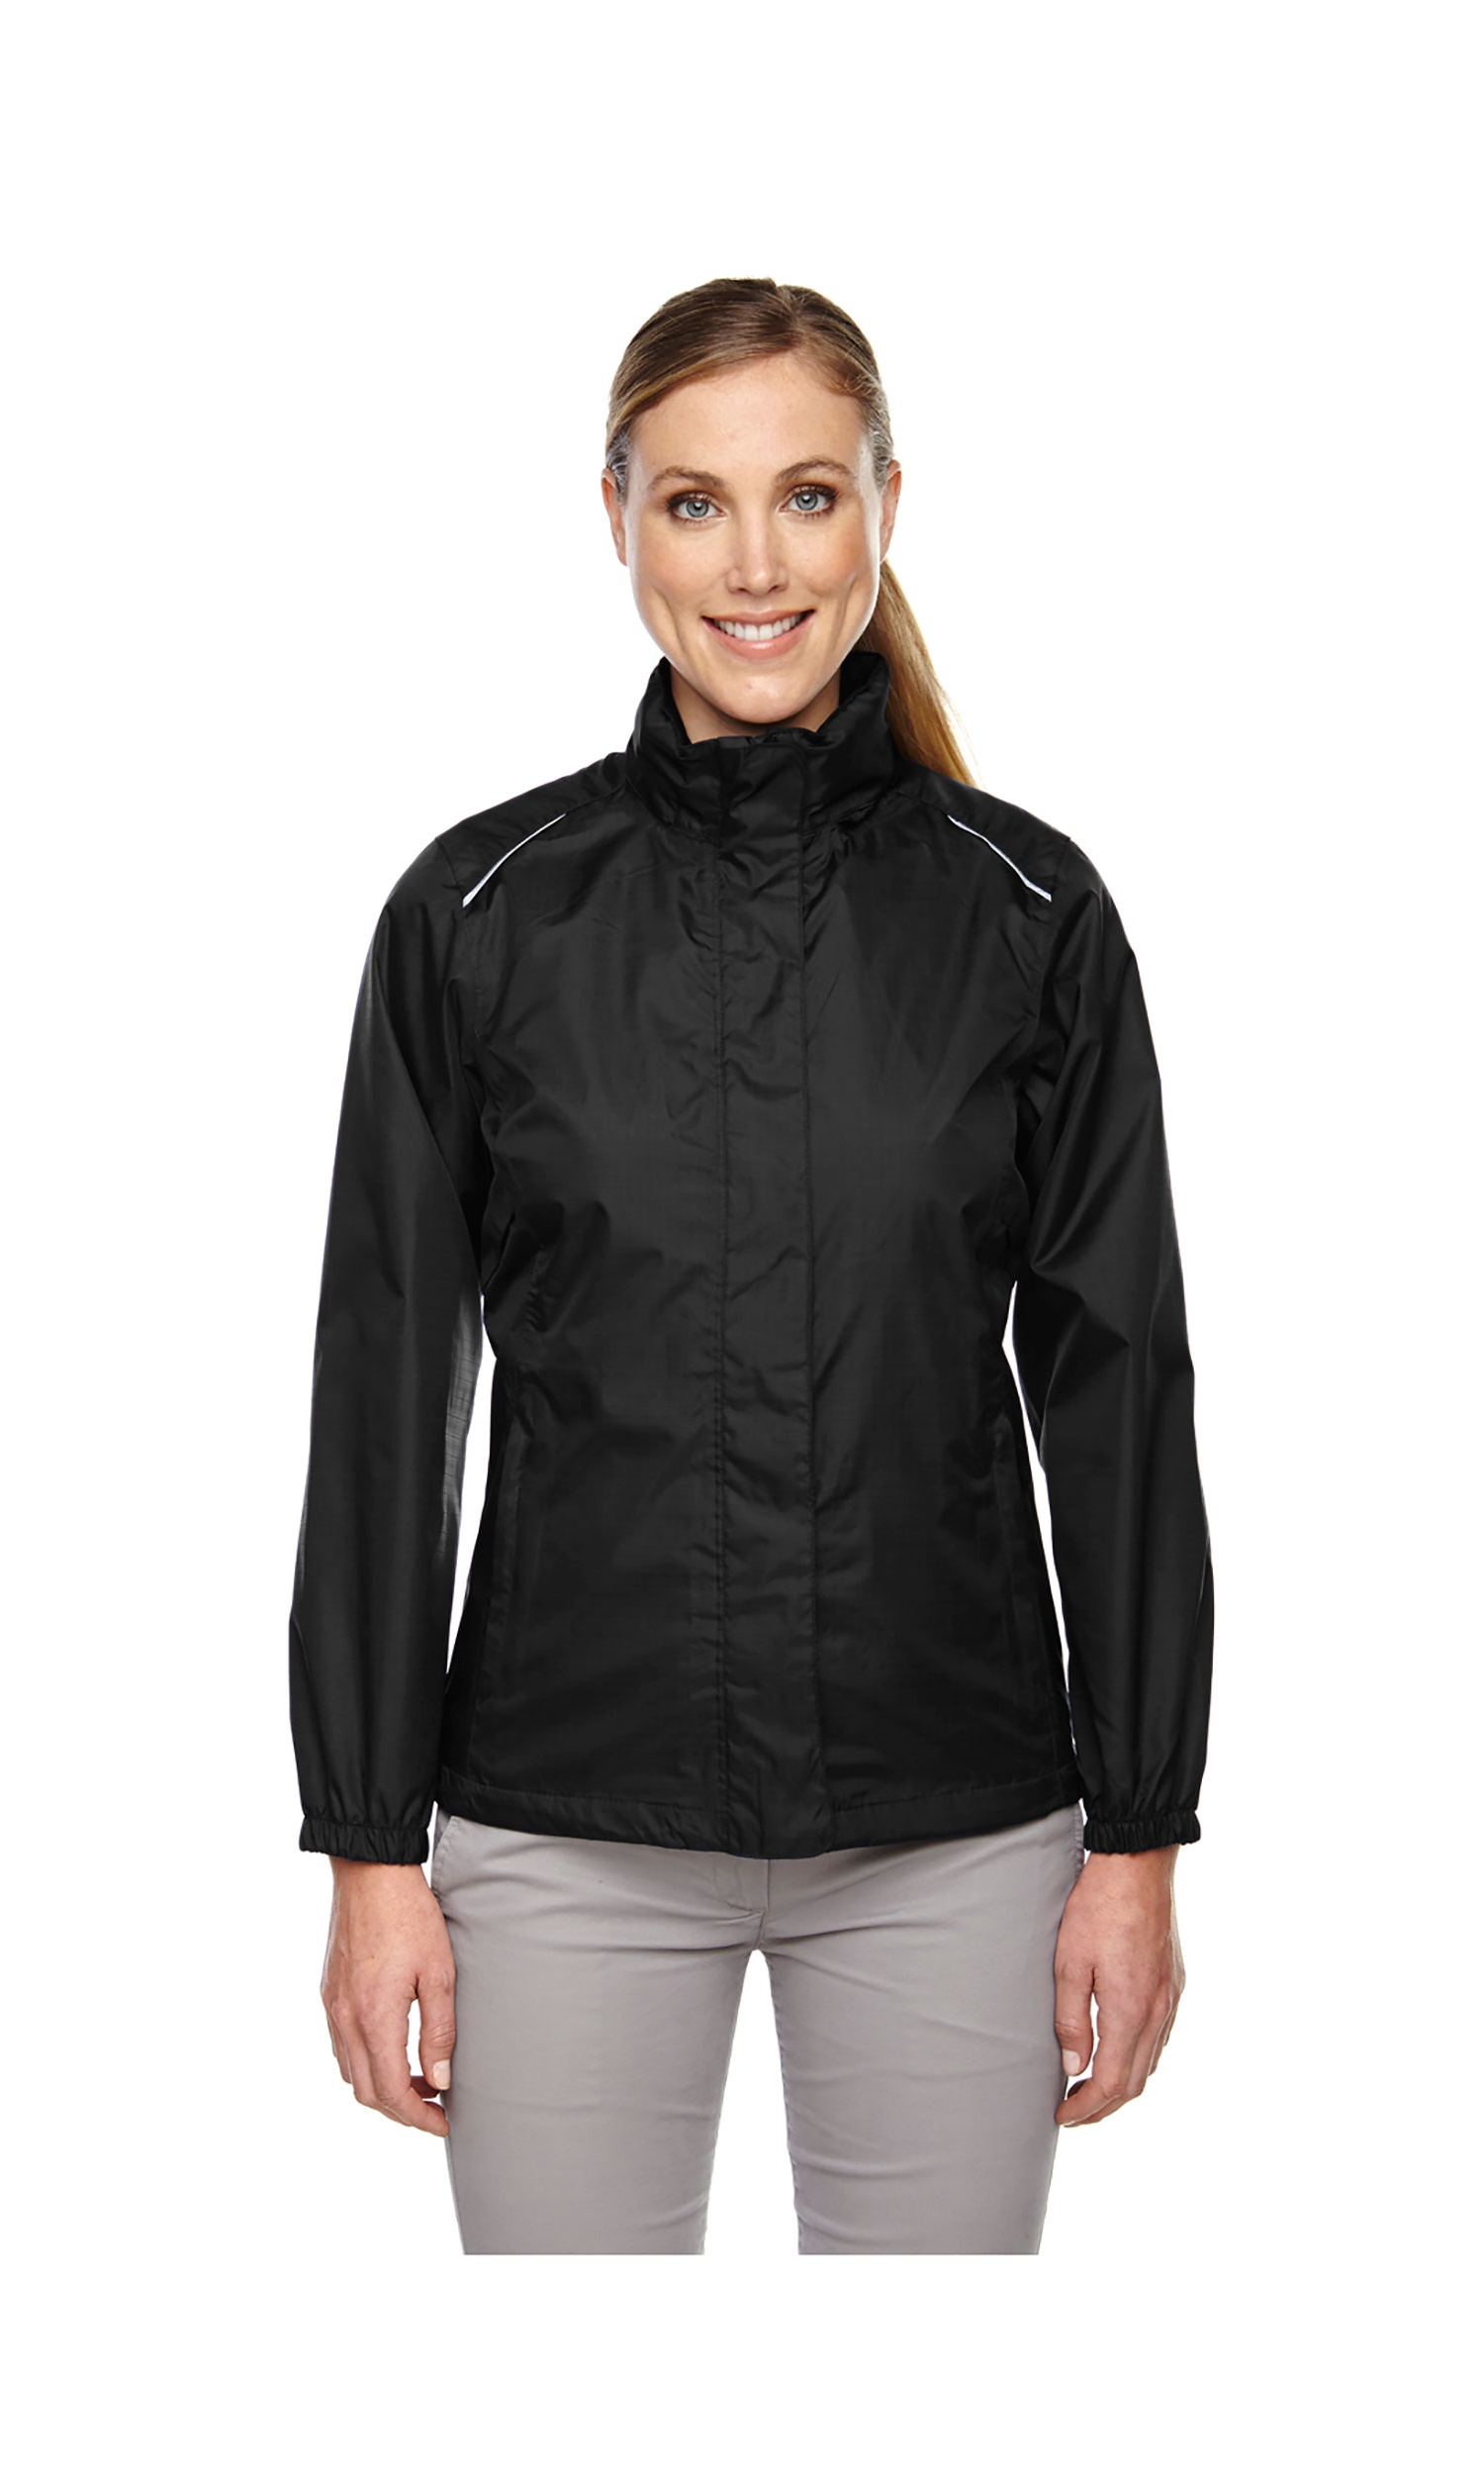 Ash City - Core 365 78185 Ladies' Climate Seam-Sealed Lightweight Variegated Ripstop Jacket - image 1 of 1